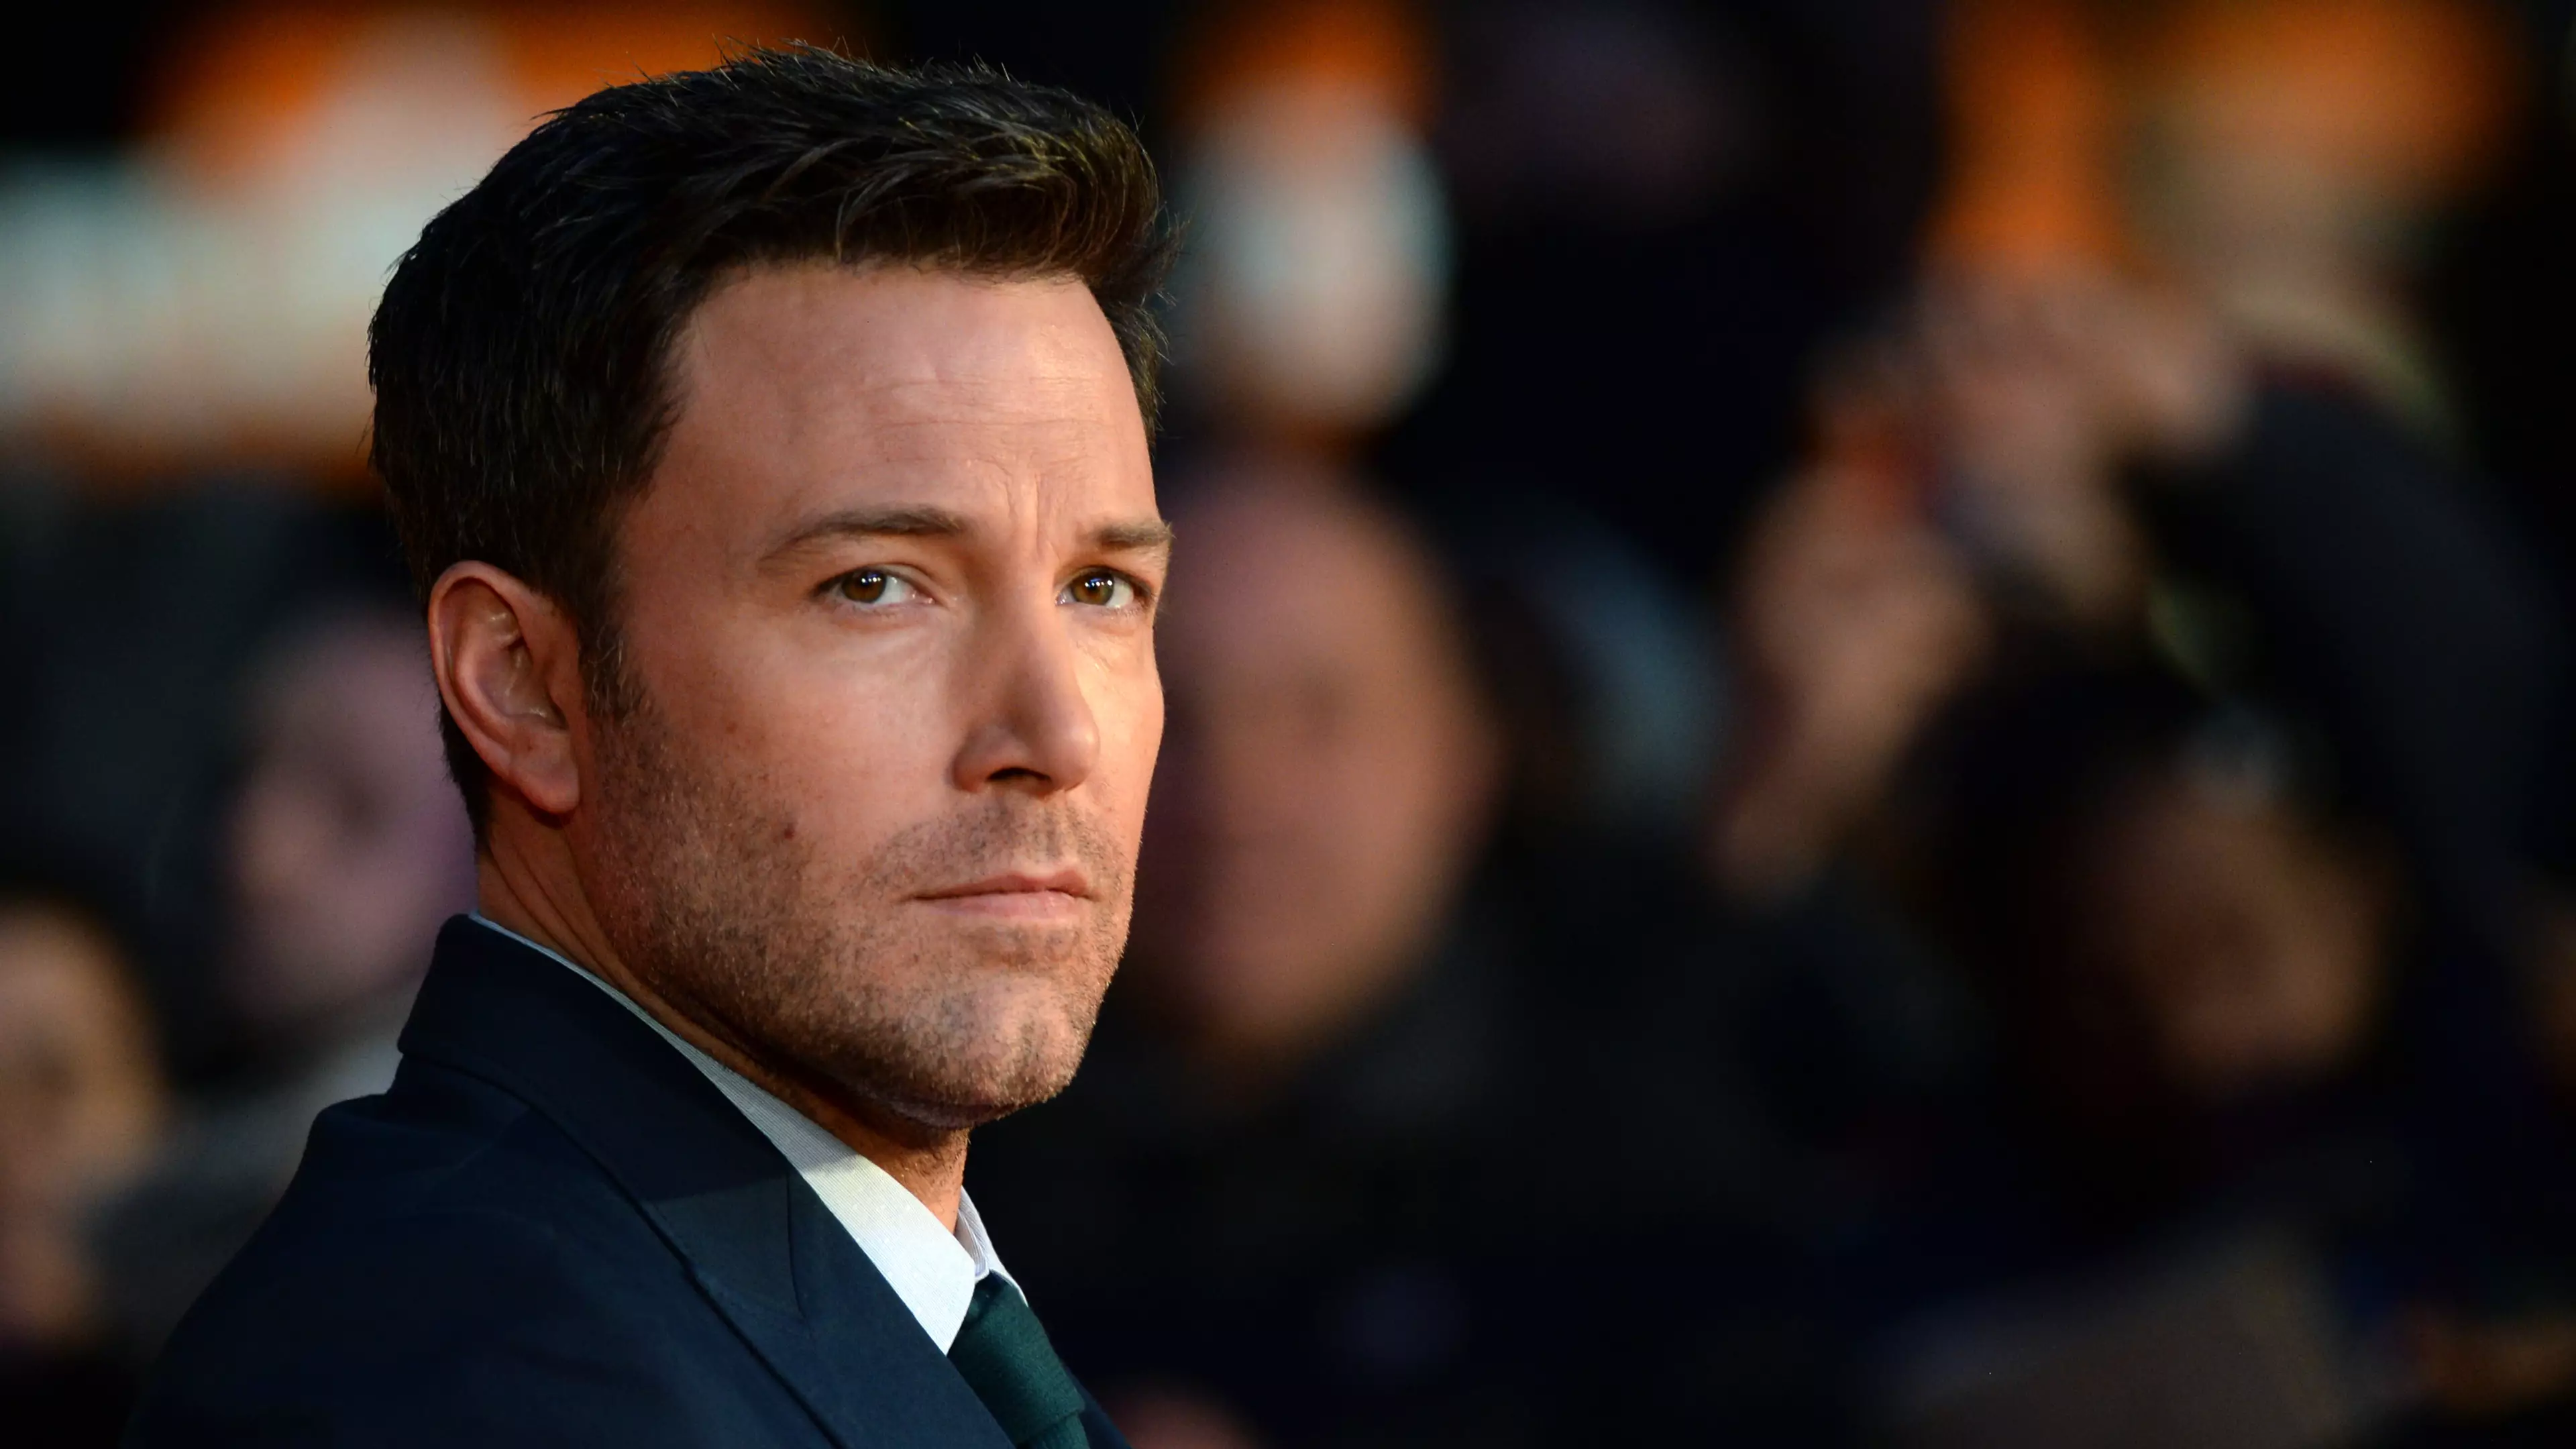 Ben Affleck's Reaction To Fan Who Tried To Say Hello To Him Divides Opinion